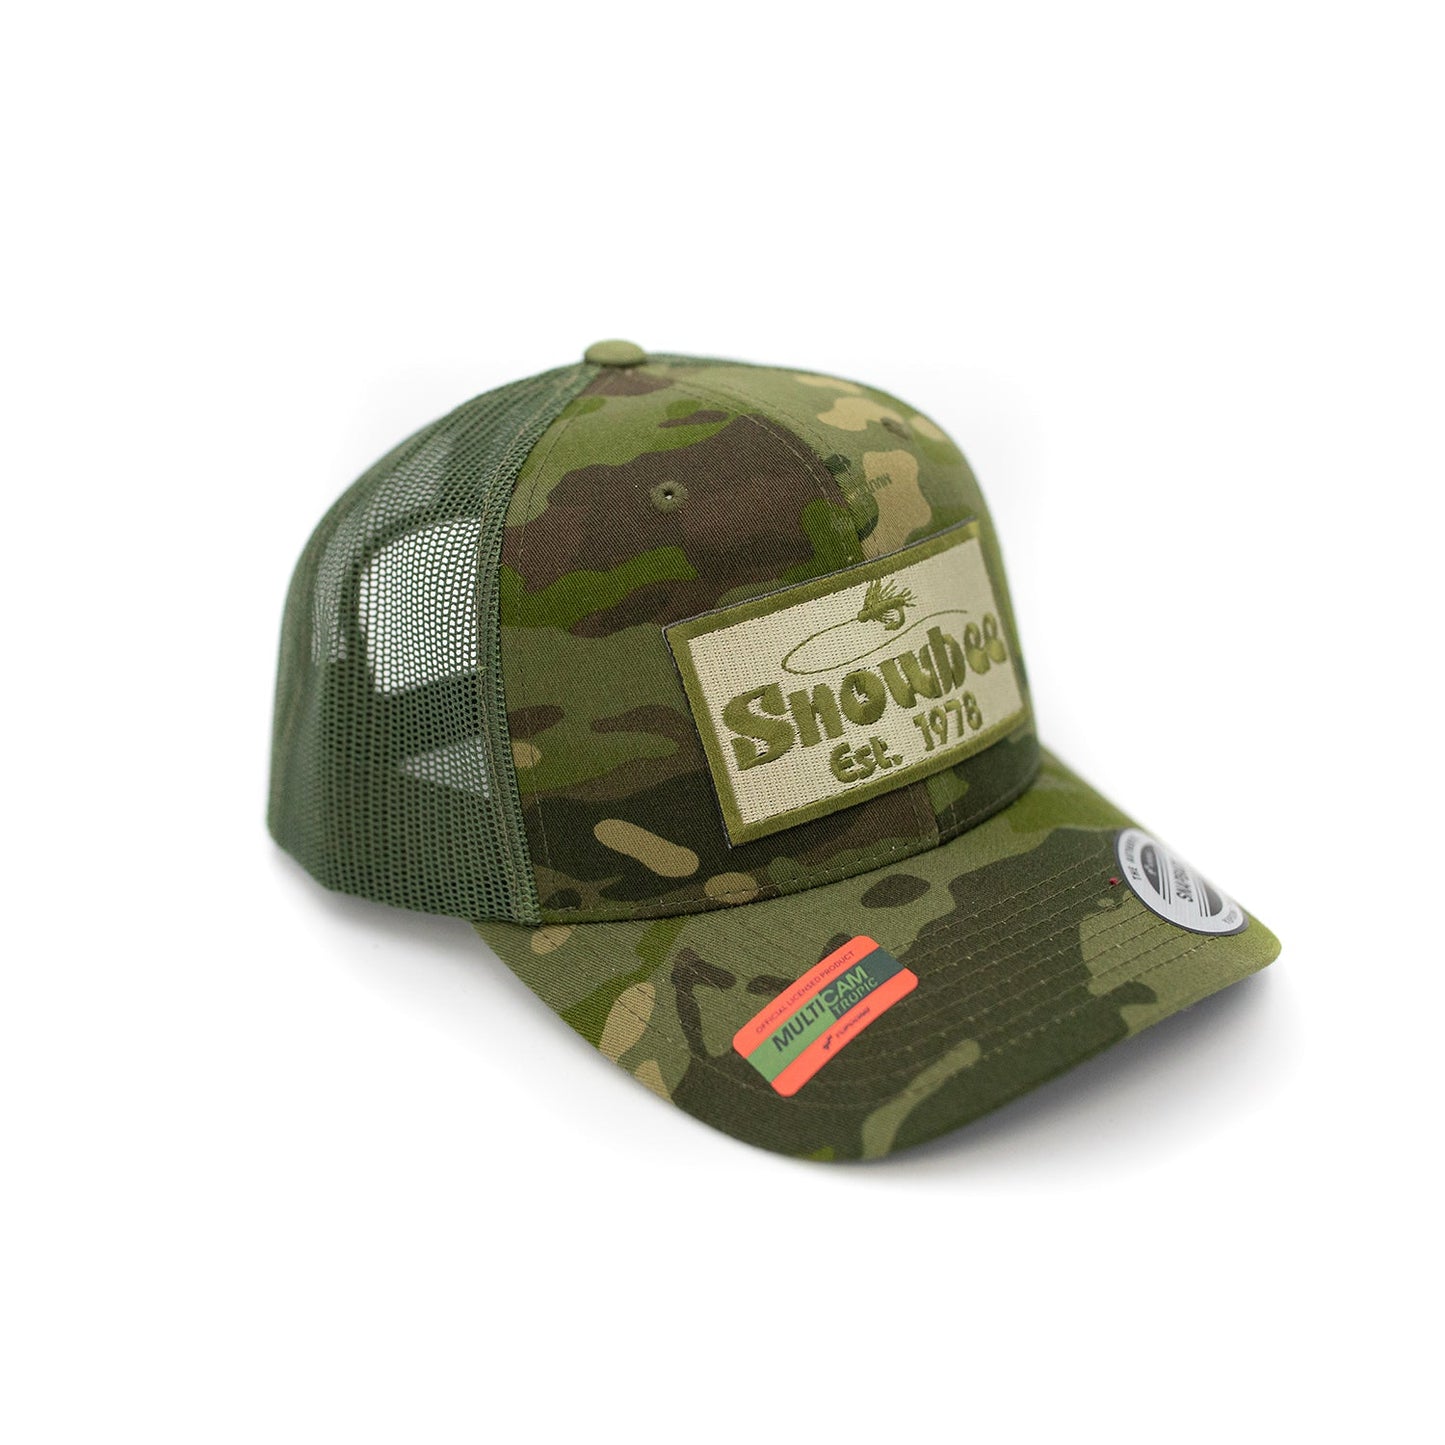 Multicam Green Fly Badge Retro Trucker Hat by Snowbee USA